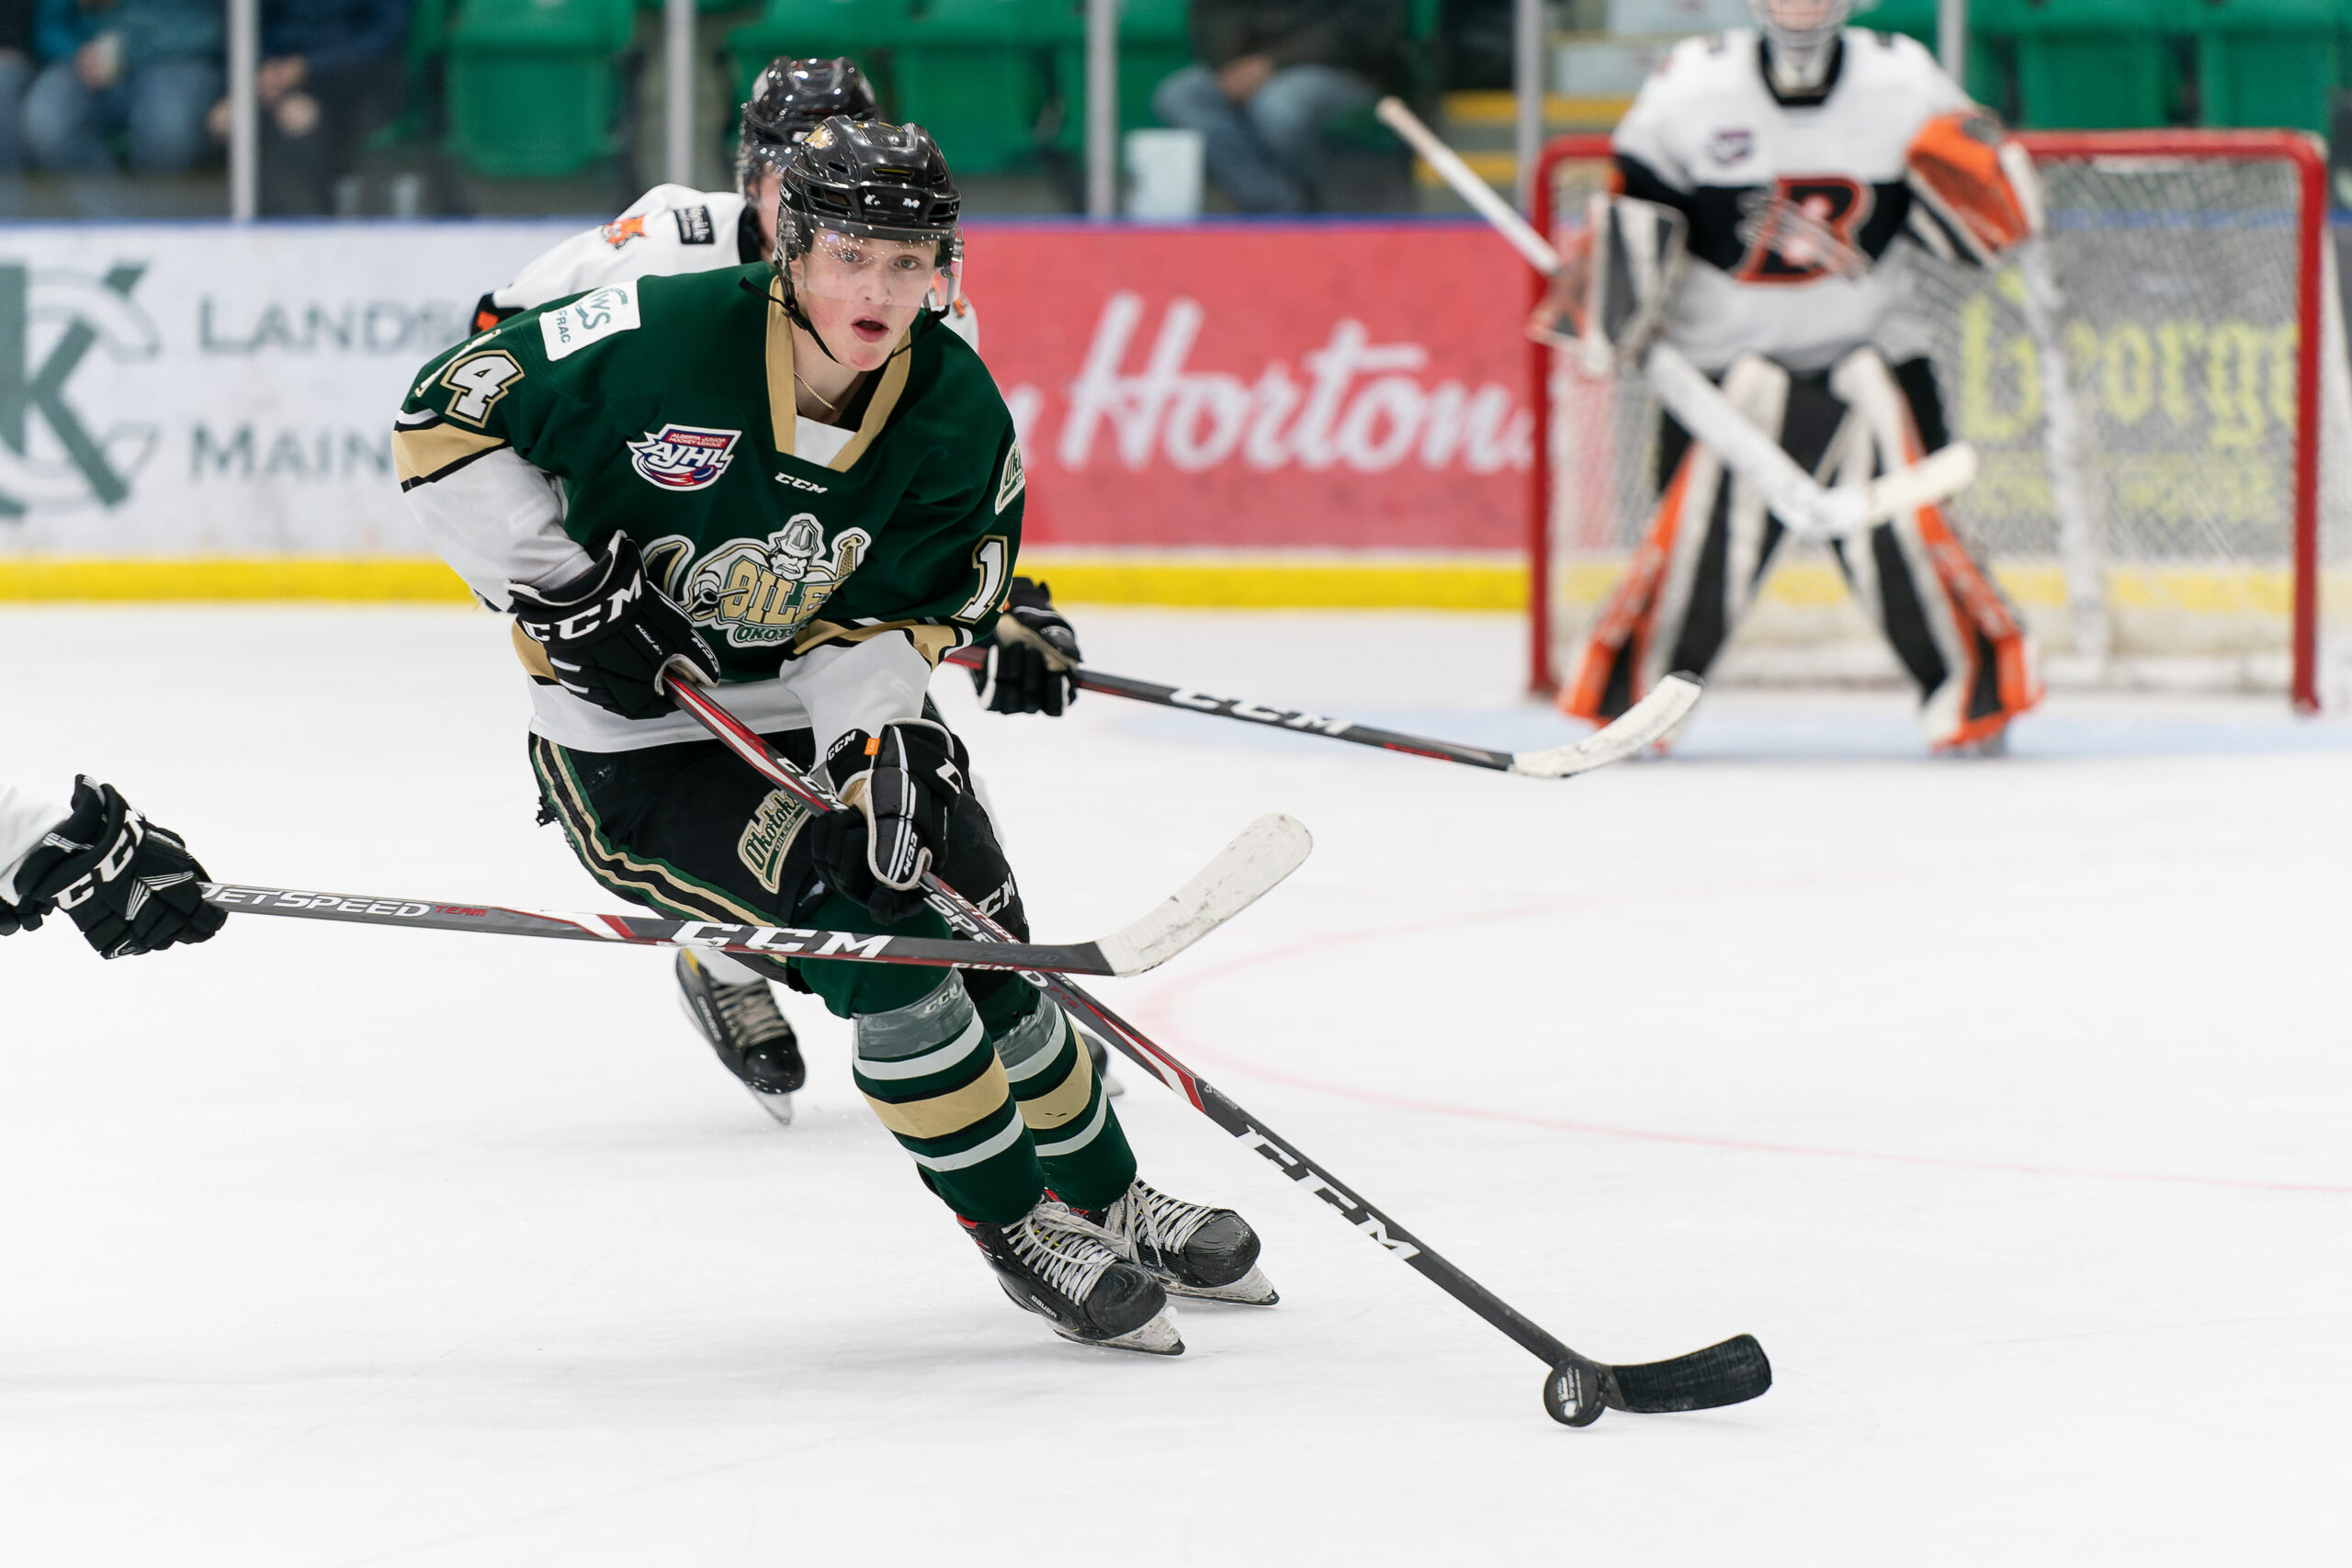 Dylan Holloway, Okotoks Oilers (AJHL) named Jr. A Player of the Year